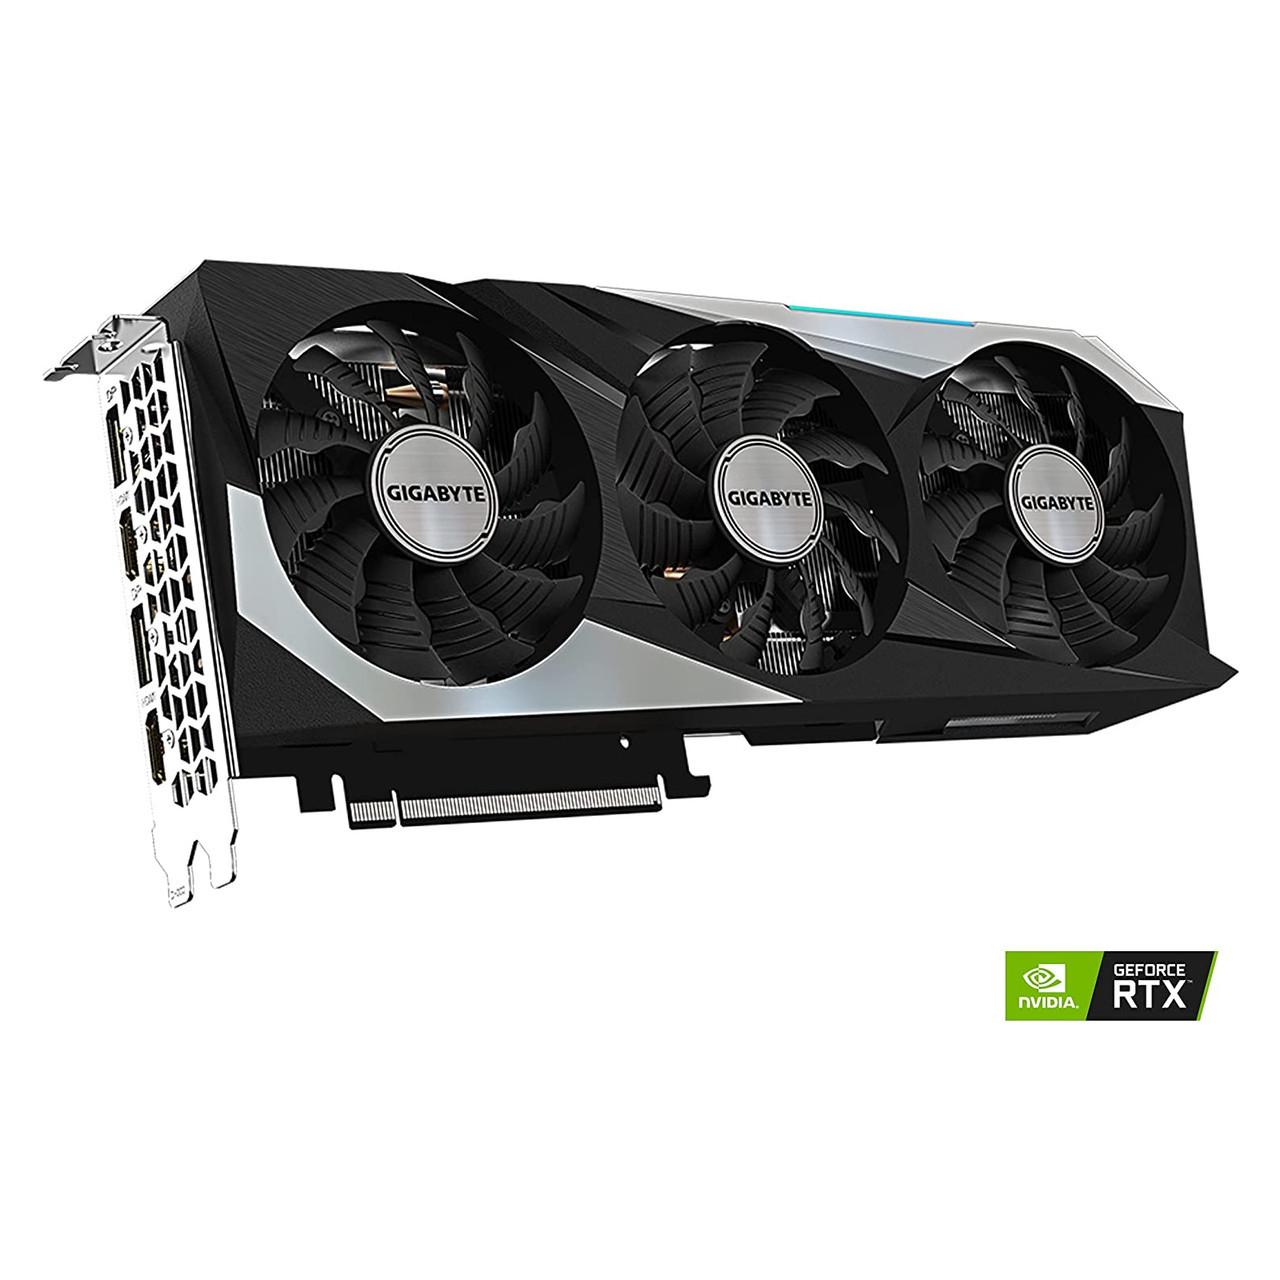 Gigabyte GV-N3070GAMING OC-8GD REV2.0 GeForce RTX 3070 Gaming OC LHR 8GB 256-bit, Up to 1815 MHz GDDR6 Video Card with Graphics Card Support Bracket (White)